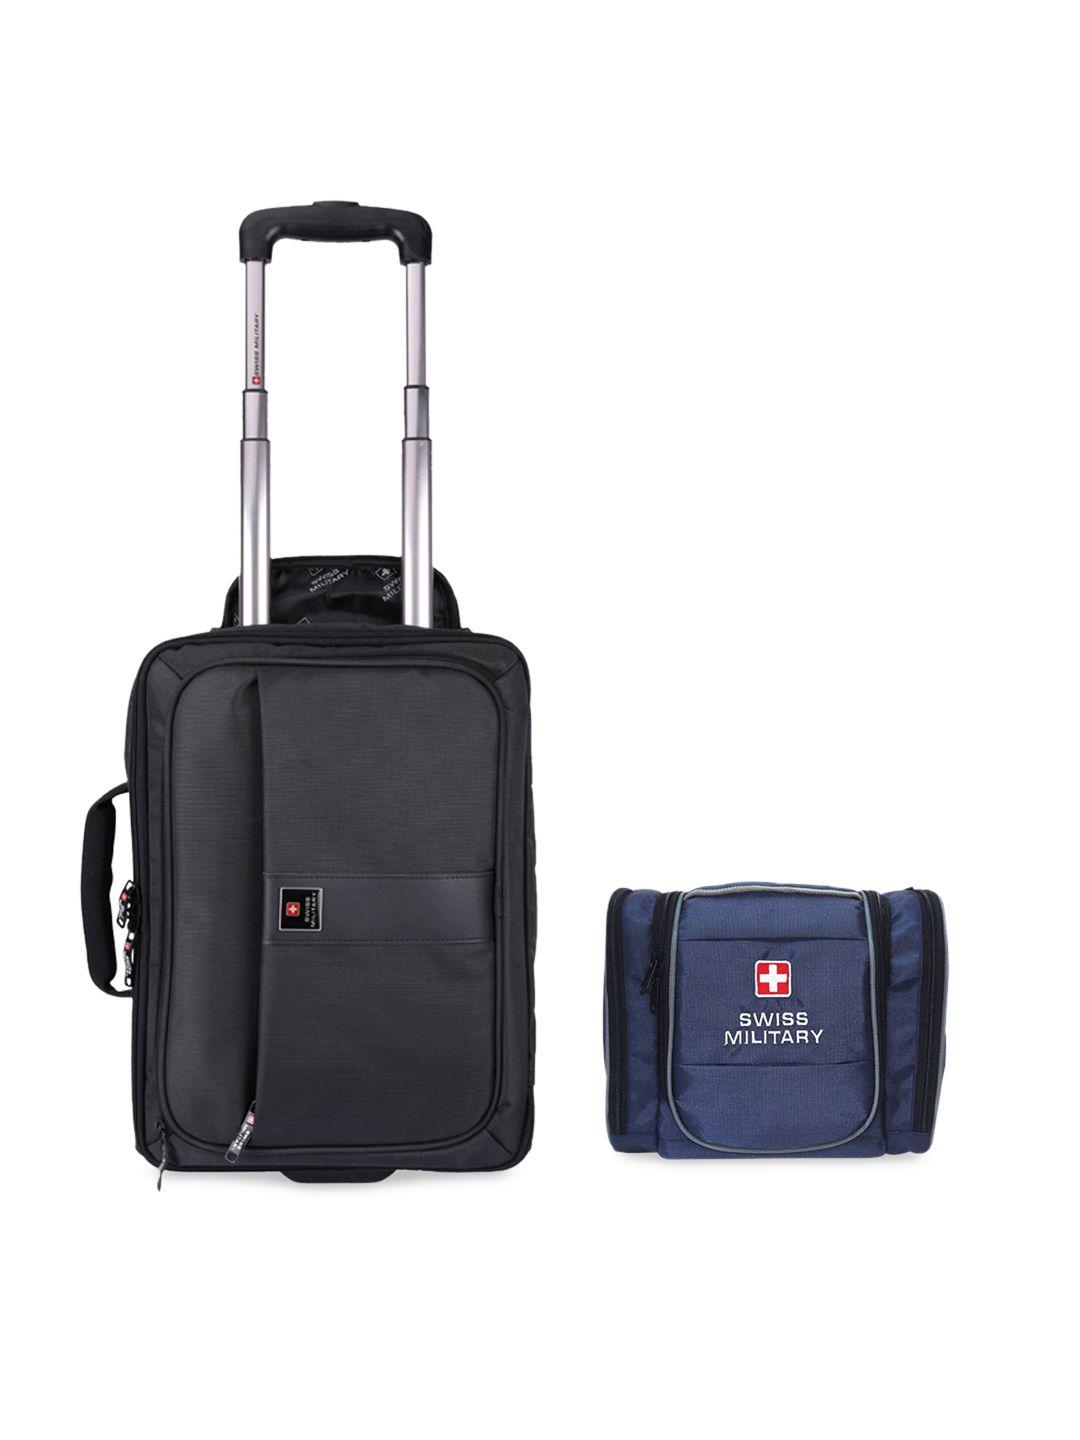 swiss military black & blue solid trolley bag with toiletry bag